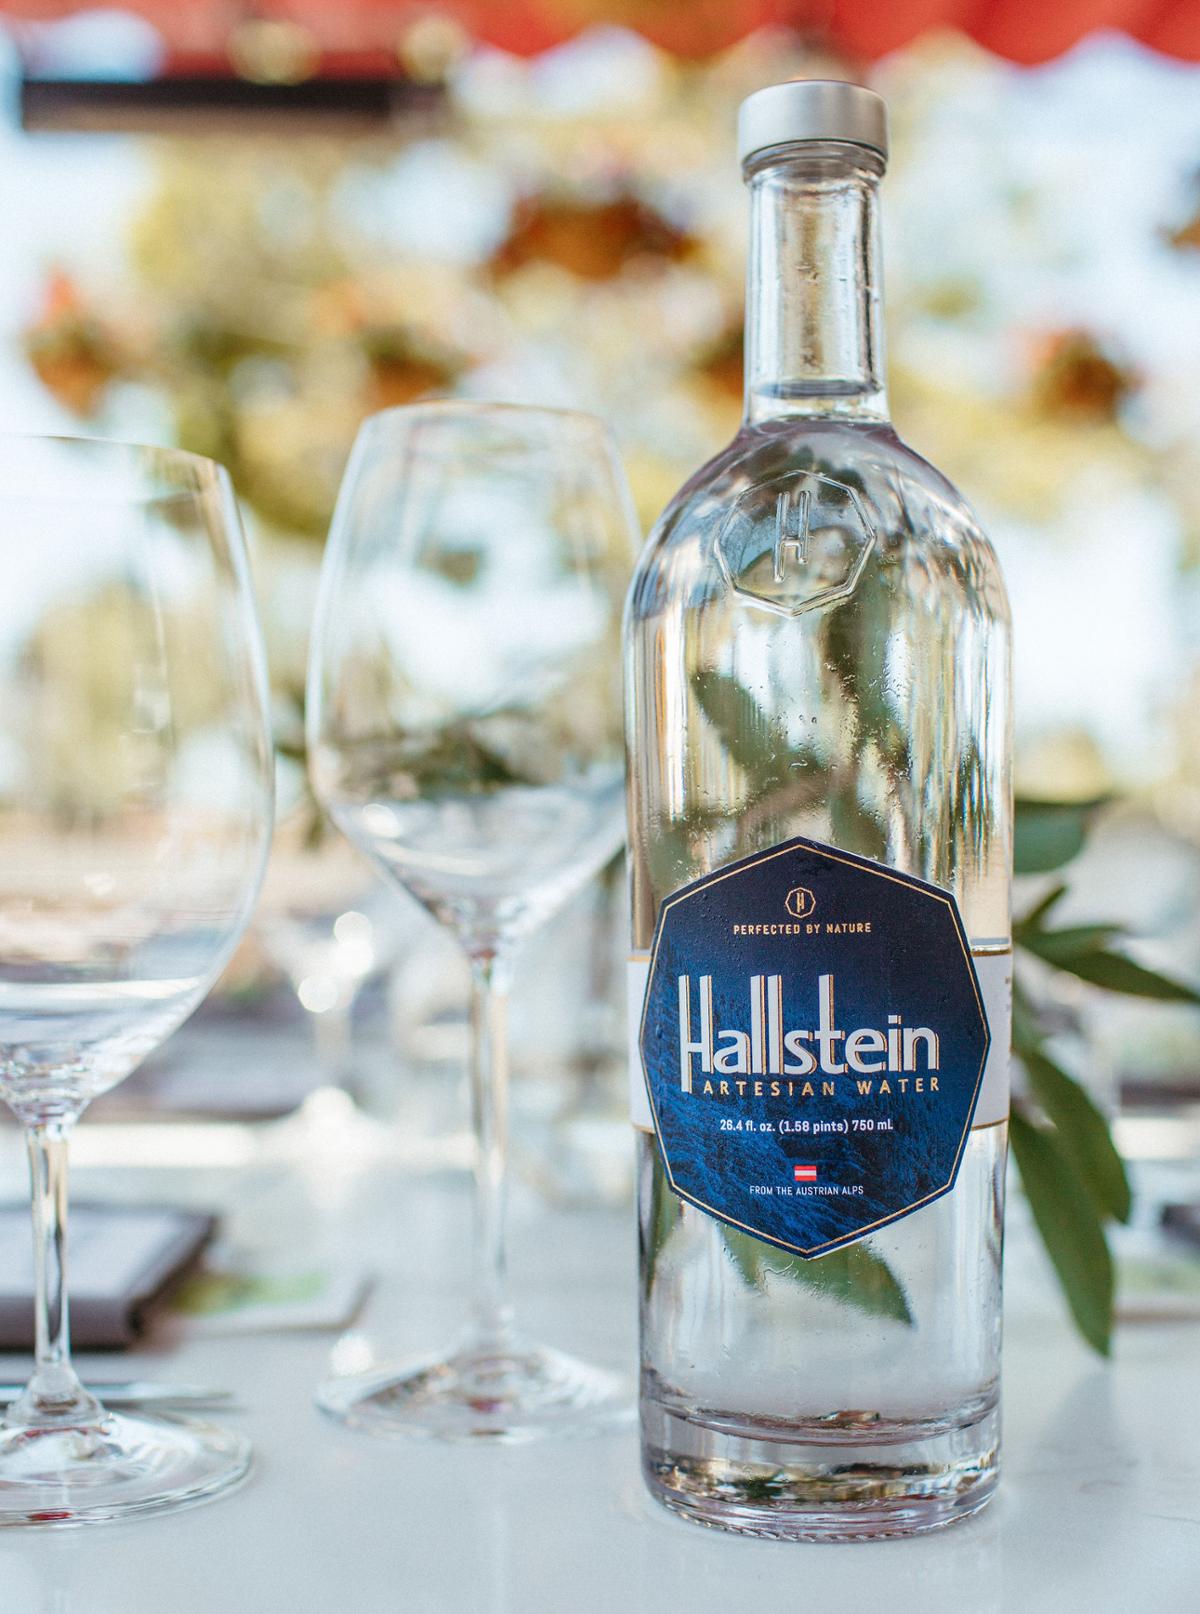 The company prides itself on supplying water with no added sodium – a mineral known to affect the immune system and cause inflammation if consumed in large quantities / Hallstein Artesian Water